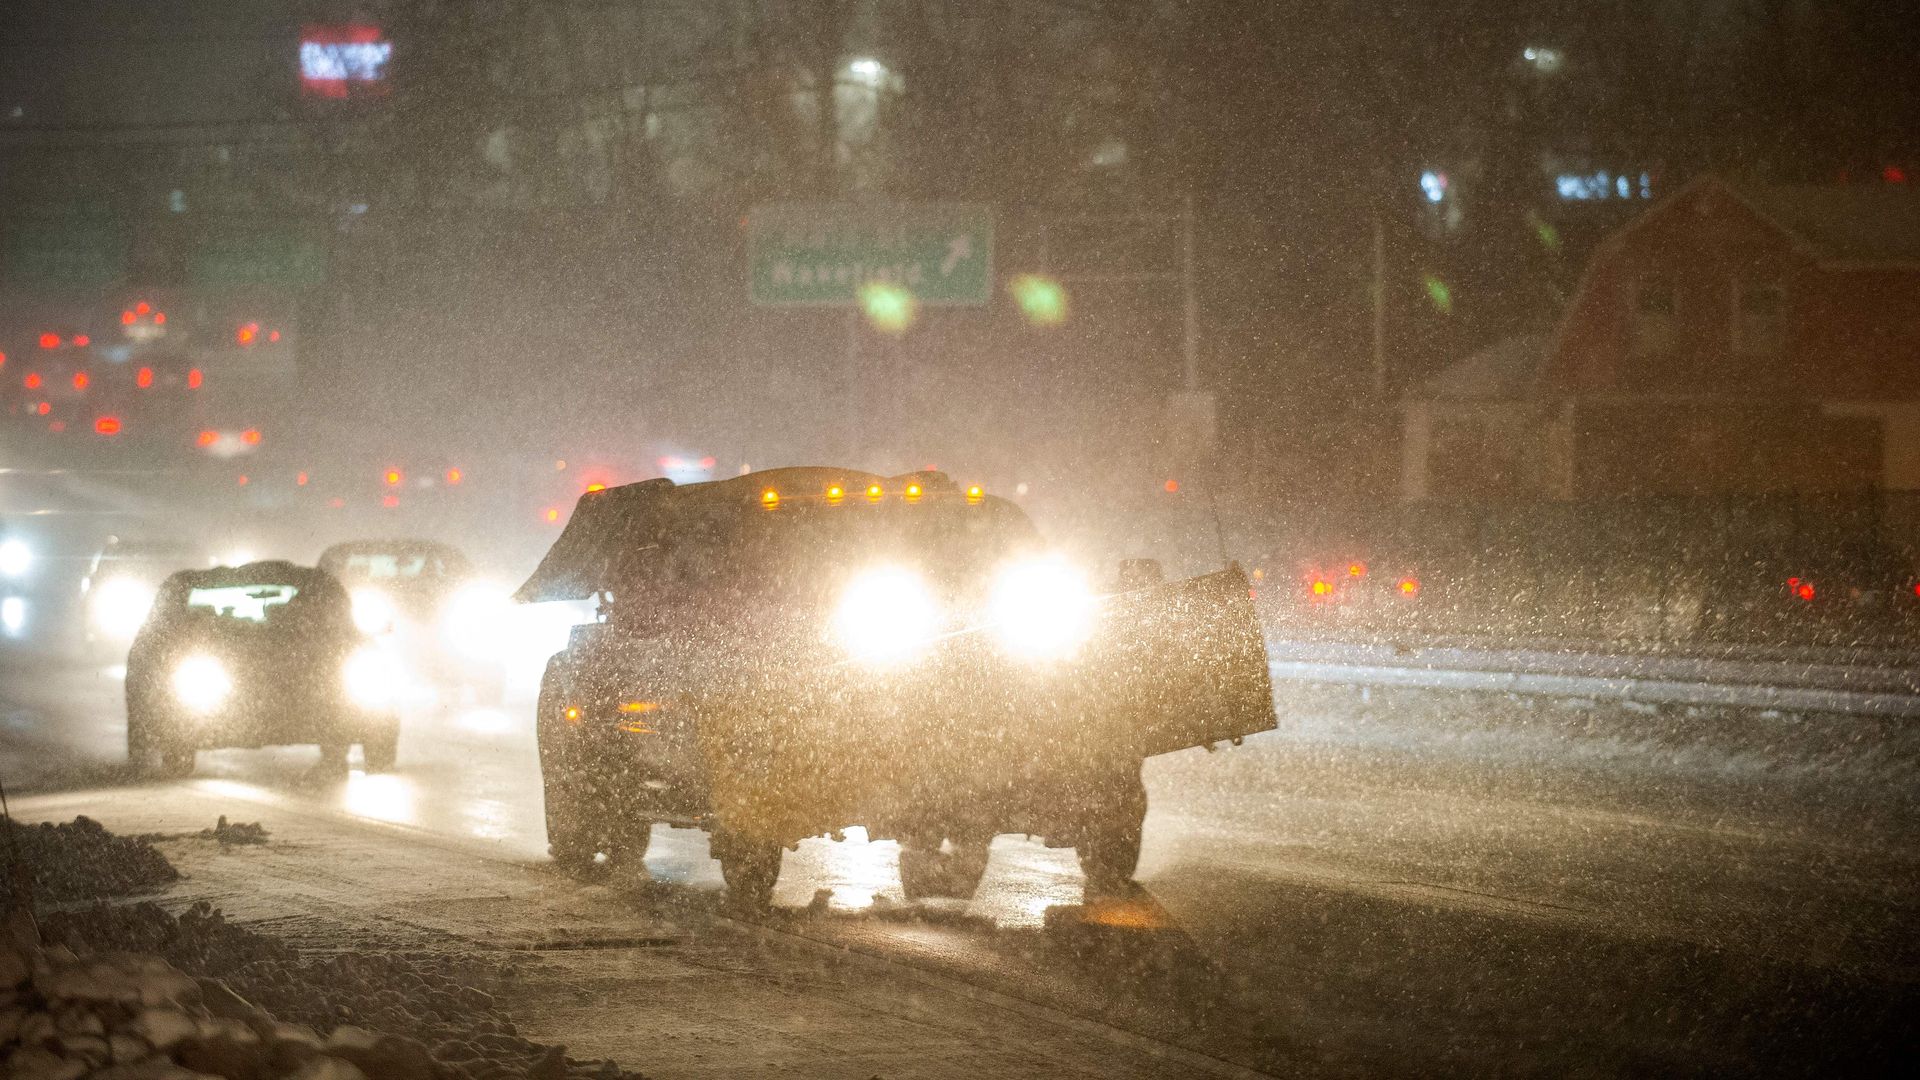 A plow makes it way down US Route 1, throwing sand, as cars are engulfed by snow in the early stages of the second part of Winter Storm Ezekiel in Saugus, Massachusetts on December 2